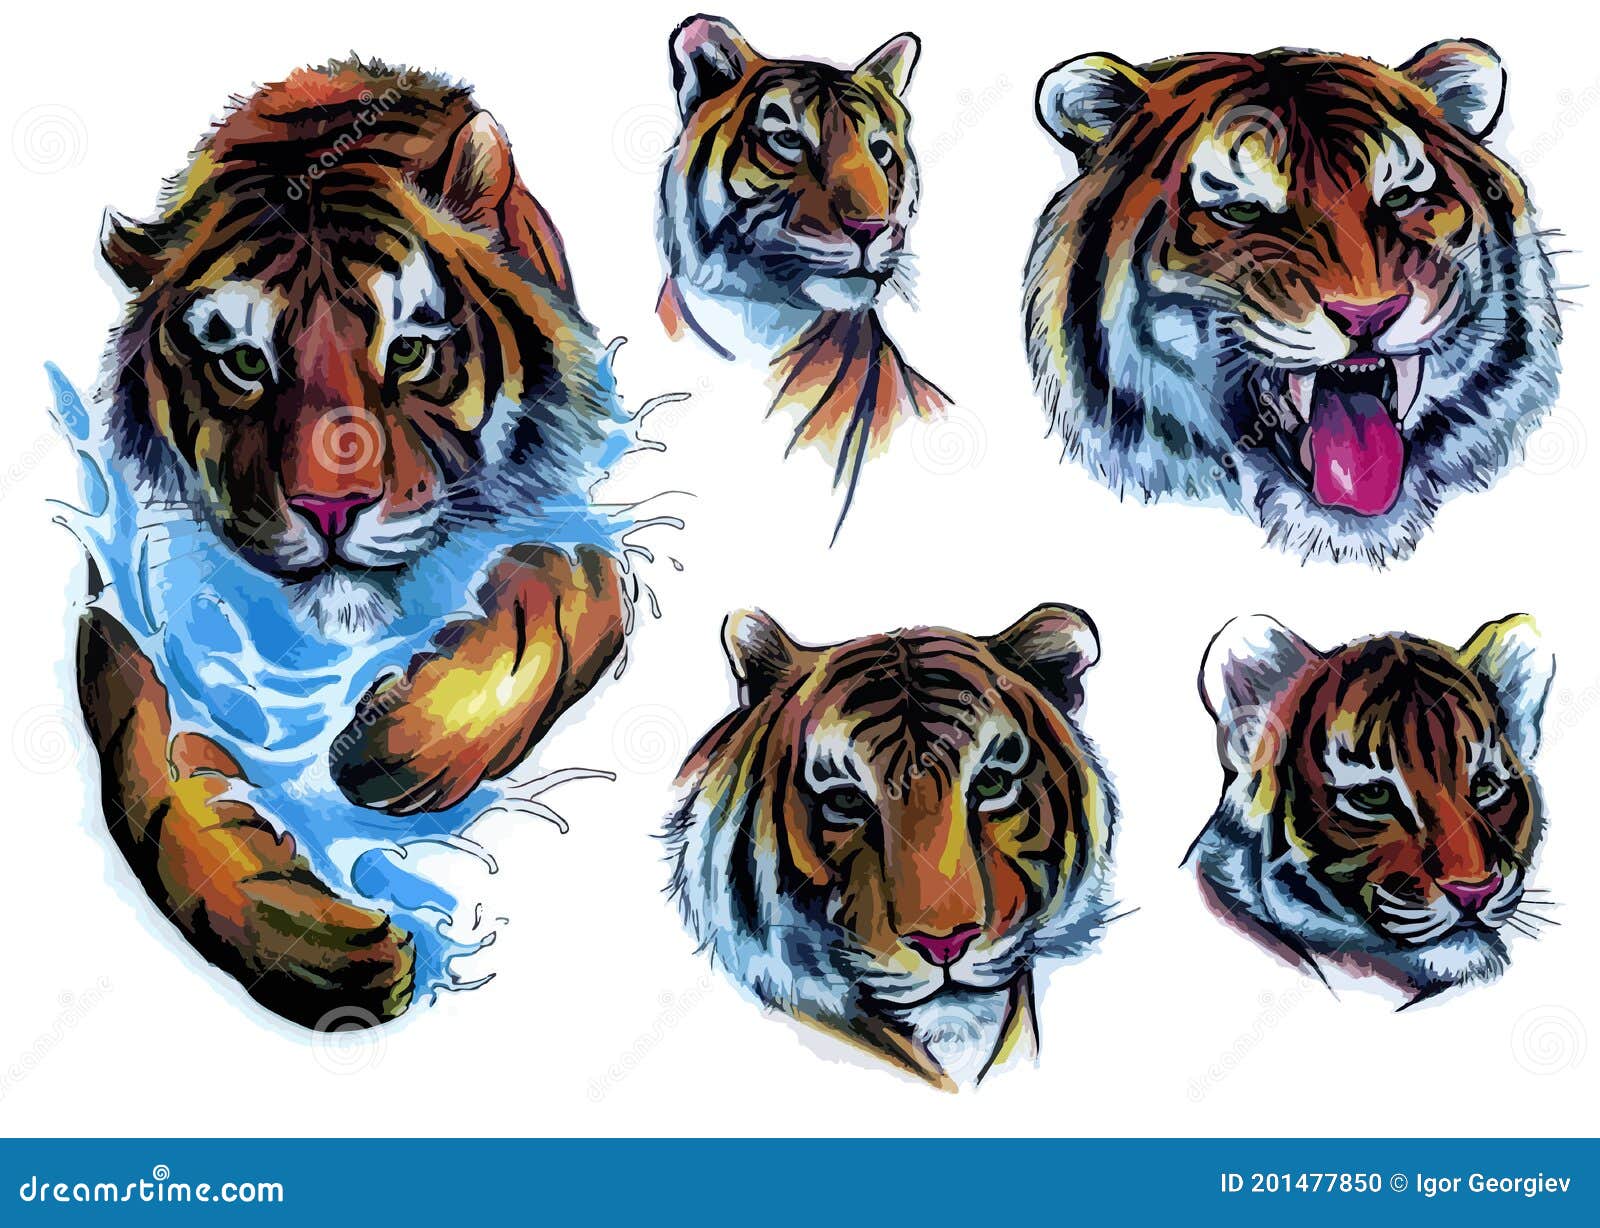 Wholesale Imitate real tattoo look real water transfer tiger lion animal  flowers butterfly flowers small symbols 15 days Tattoo Sticker From  malibabacom